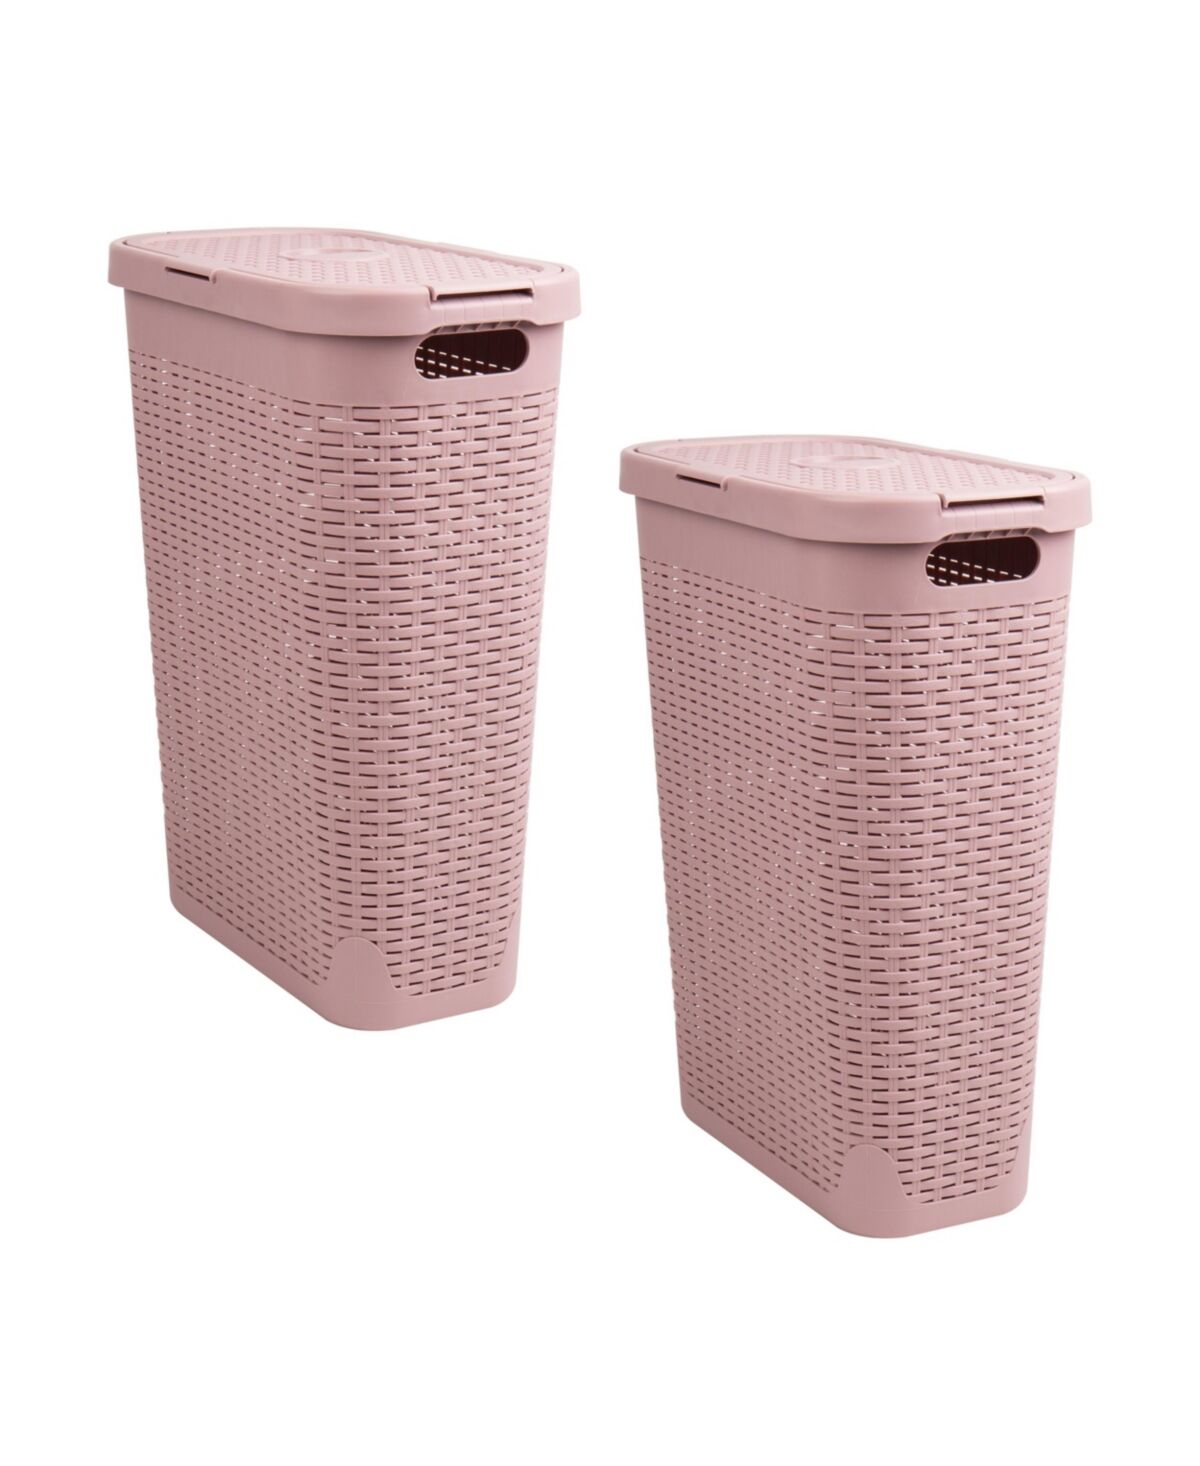 Mind Reader Basket Collection, Slim Laundry Hamper, 40 Liter 15kg, 33lbs Capacity, Cut Out Handles, Attached Hinged Lid, Ventilated, Set of 2 - Pink